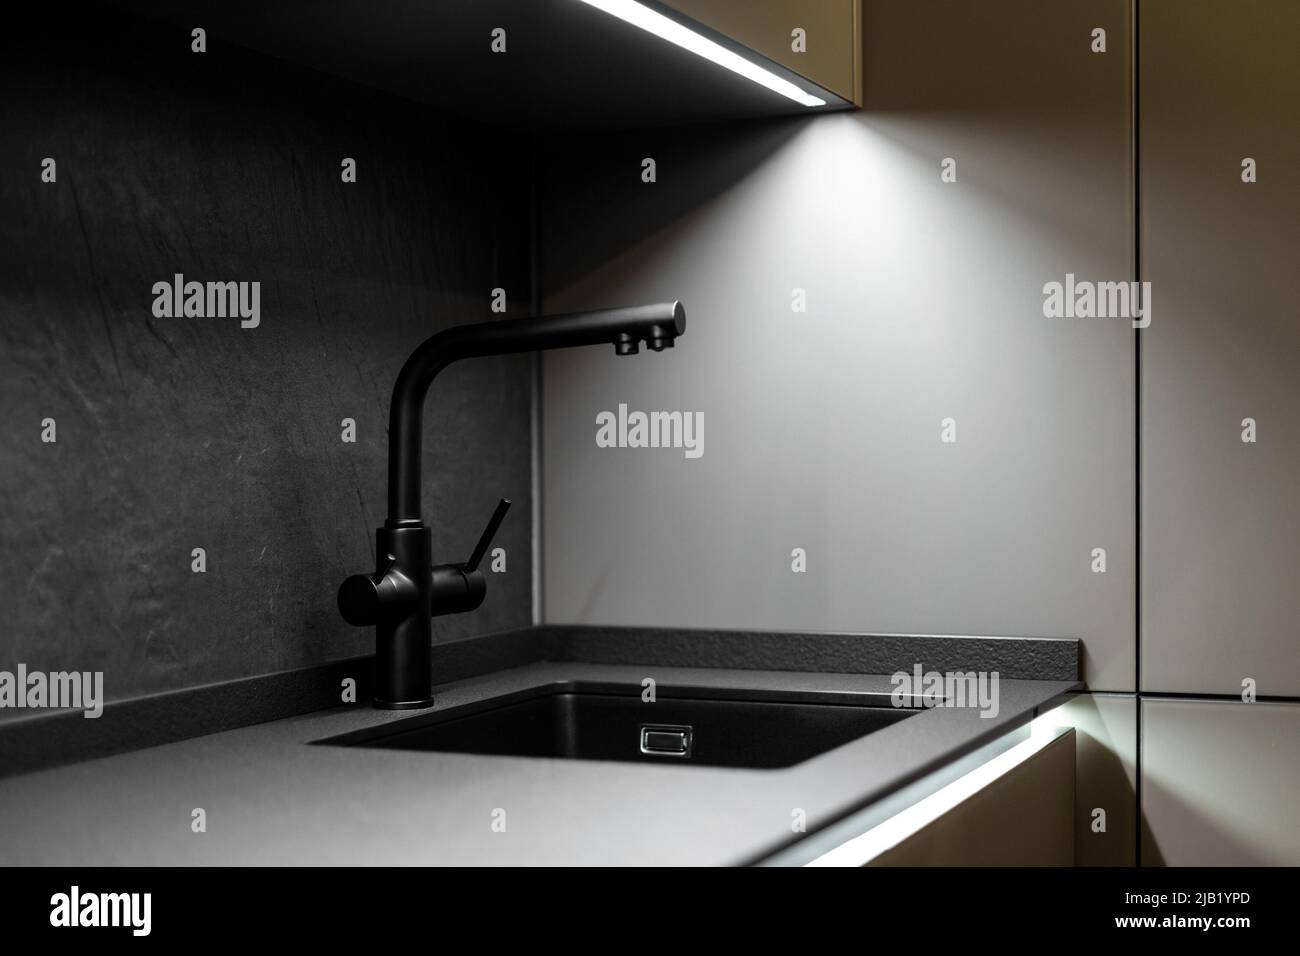 Expensive luxury kitchen sink with faucet Stock Photo